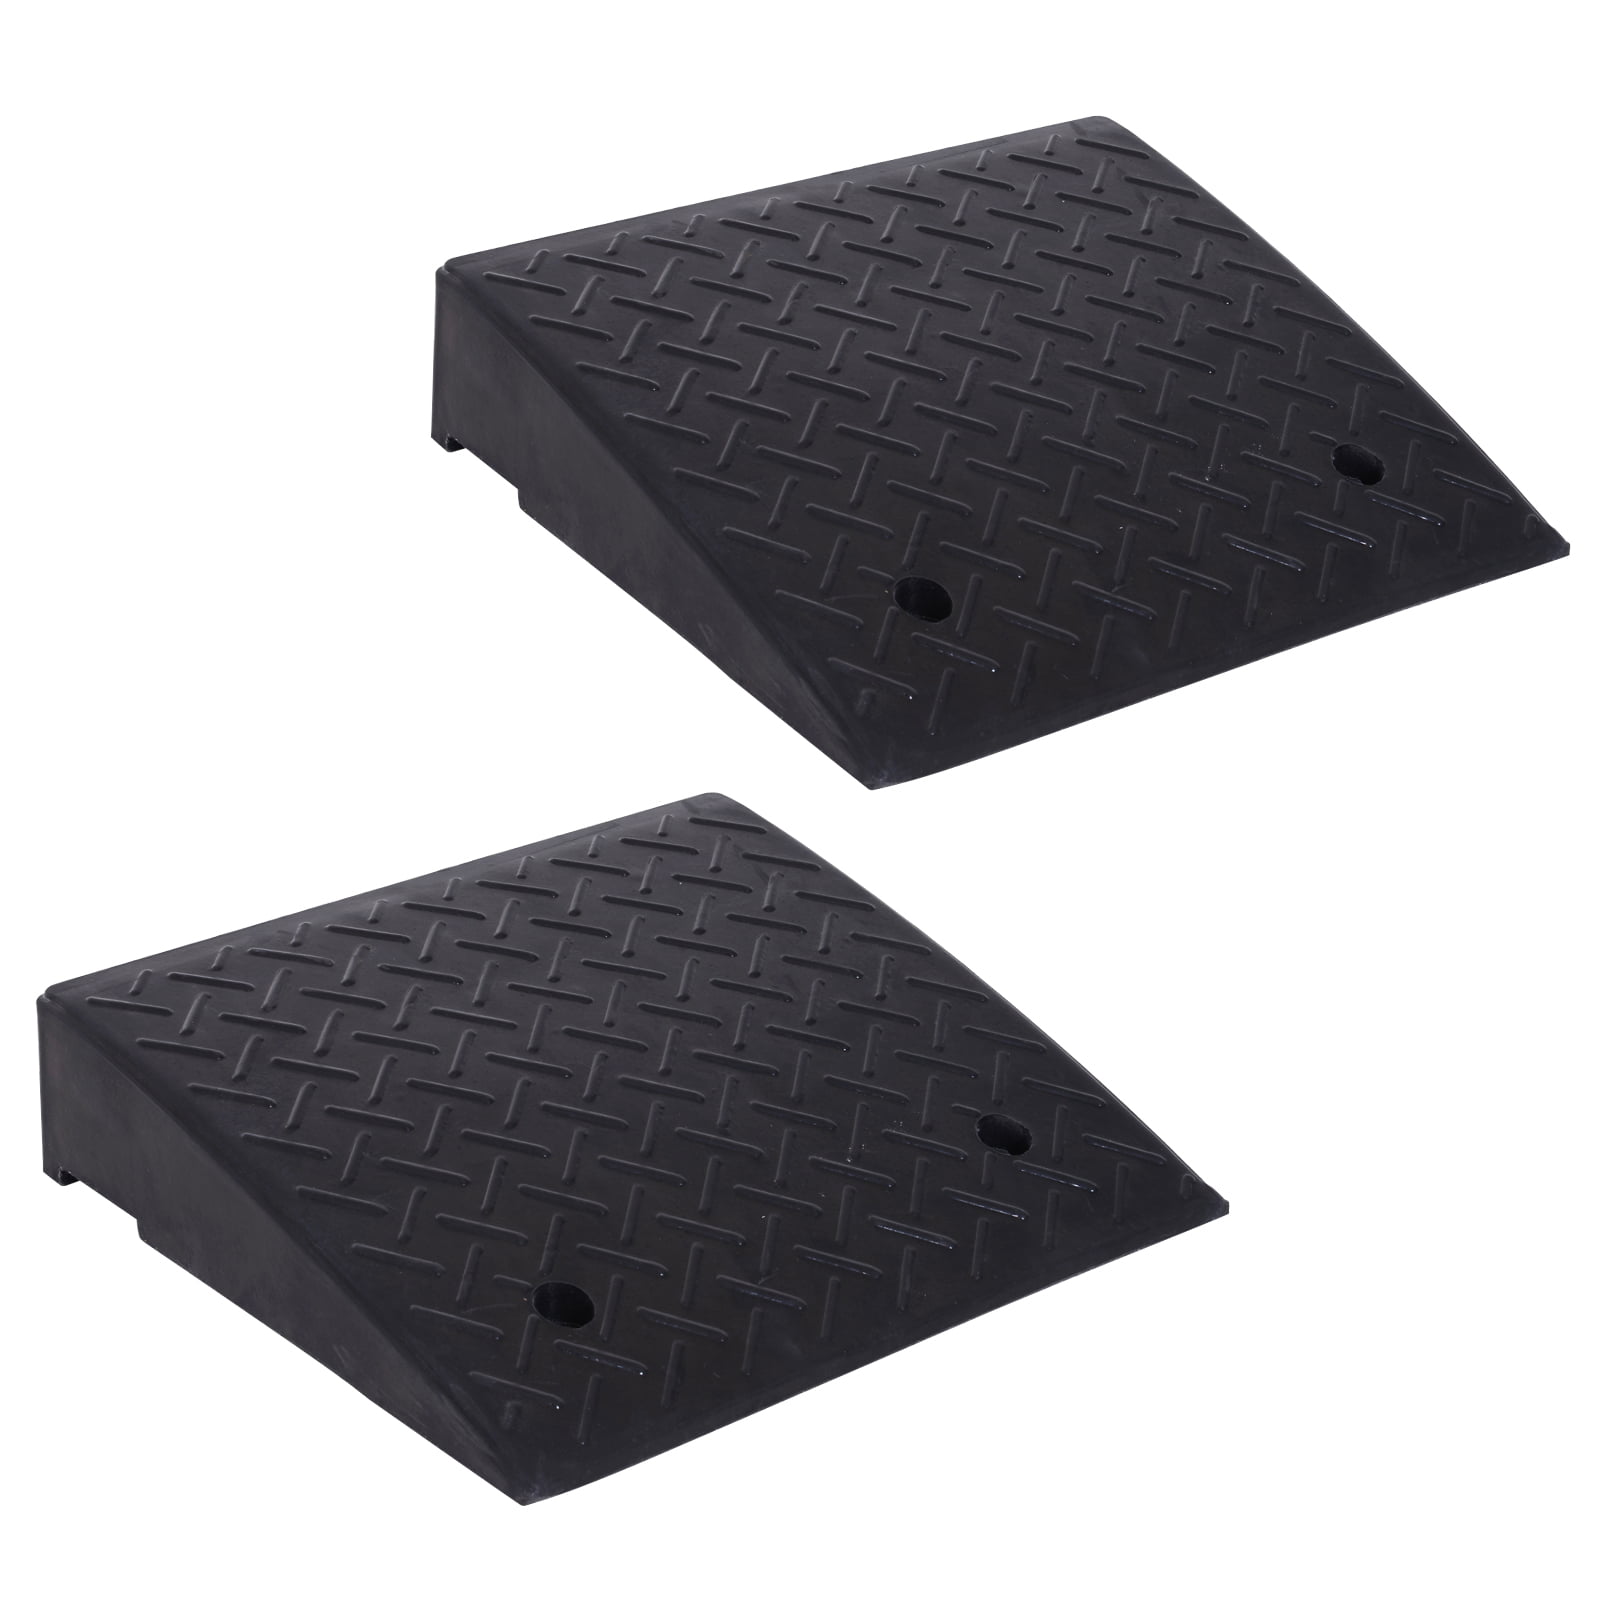 Color : Black, Size : 503317cm Zhou-WD Scooters Plastic Ramps,Baby Carriage Ramps Portable Slope Ramps Vehicle Safety Ramps Material Handling Ramps Car Slope Pad car ramps 